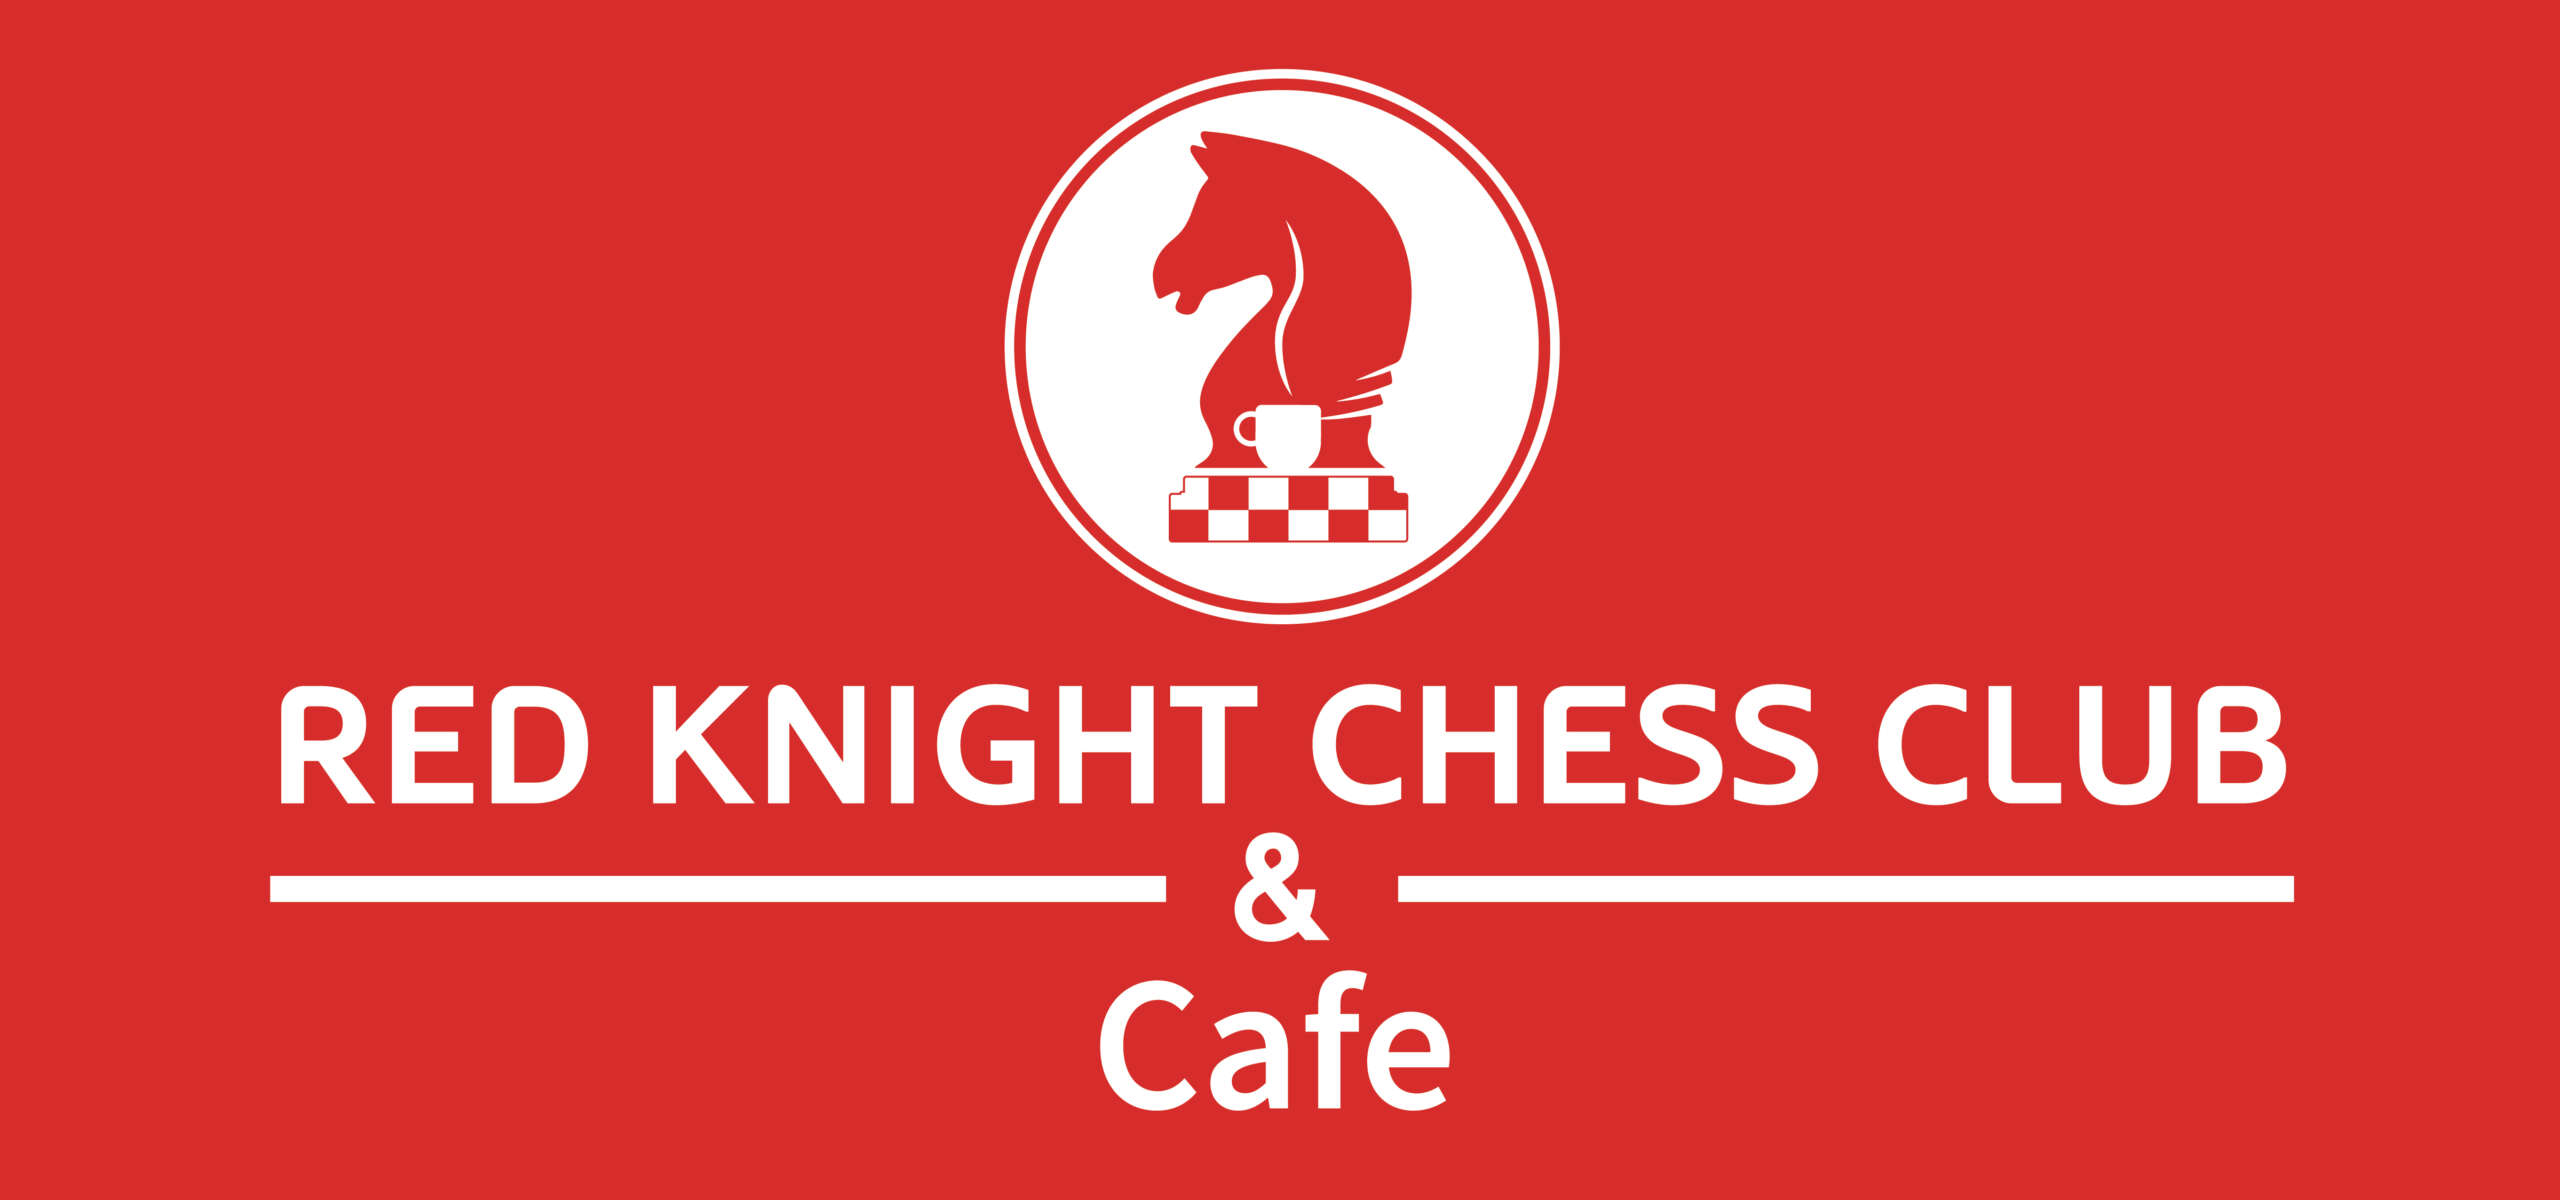 RED KNIGHT CHESS CLUB & Cafe